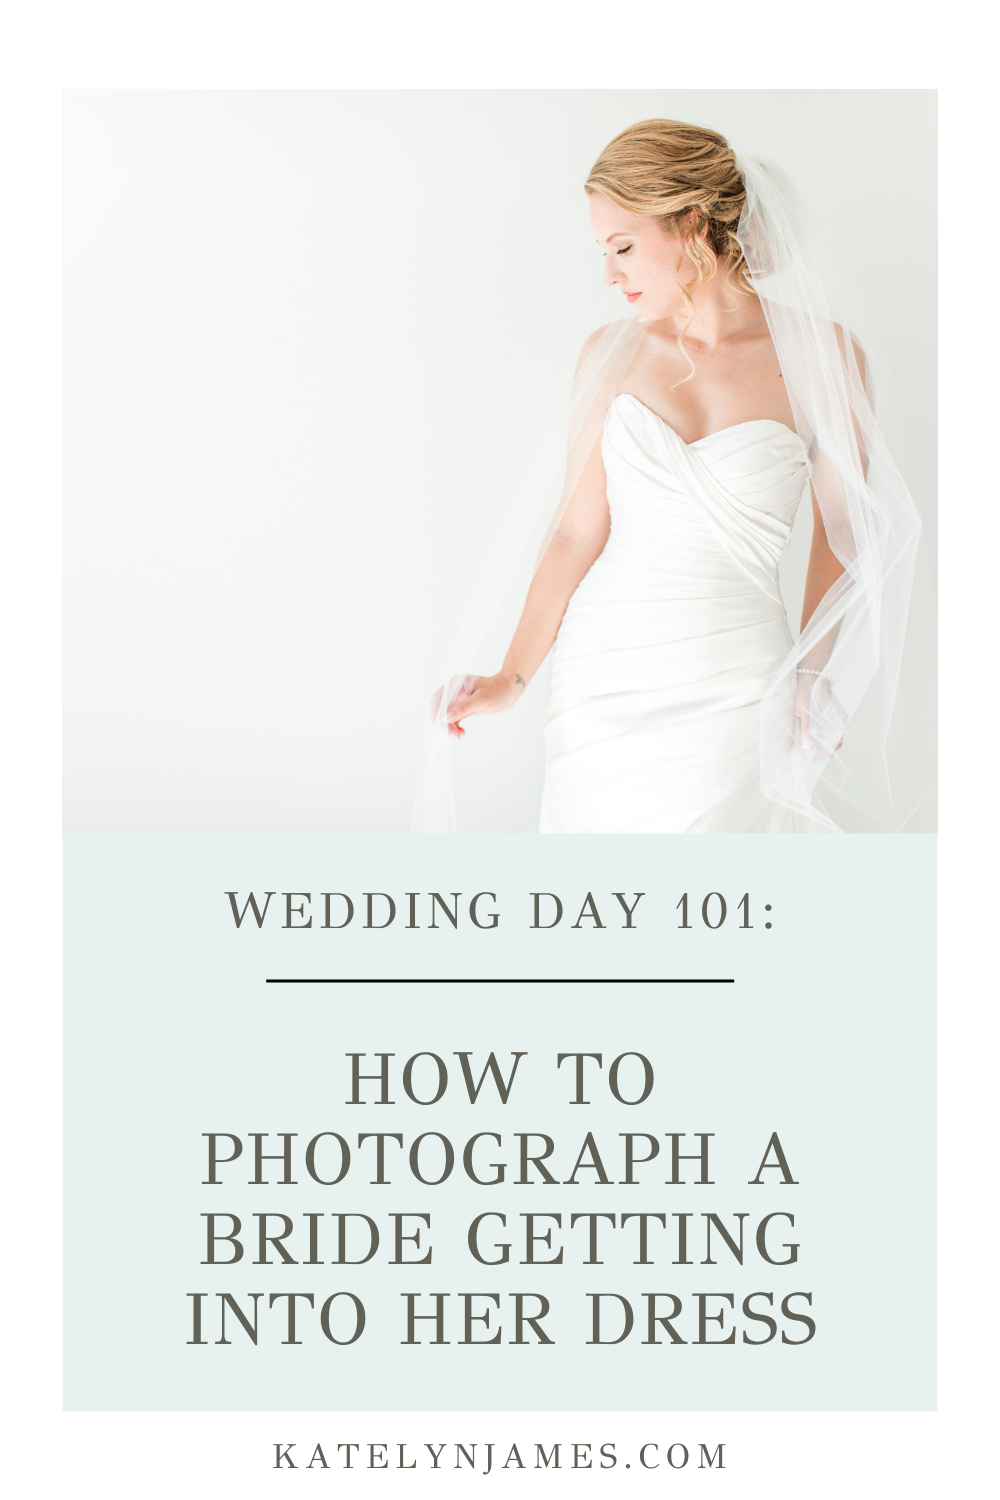 Wedding Day 101: How to Photograph a Bride Getting into Her Dress